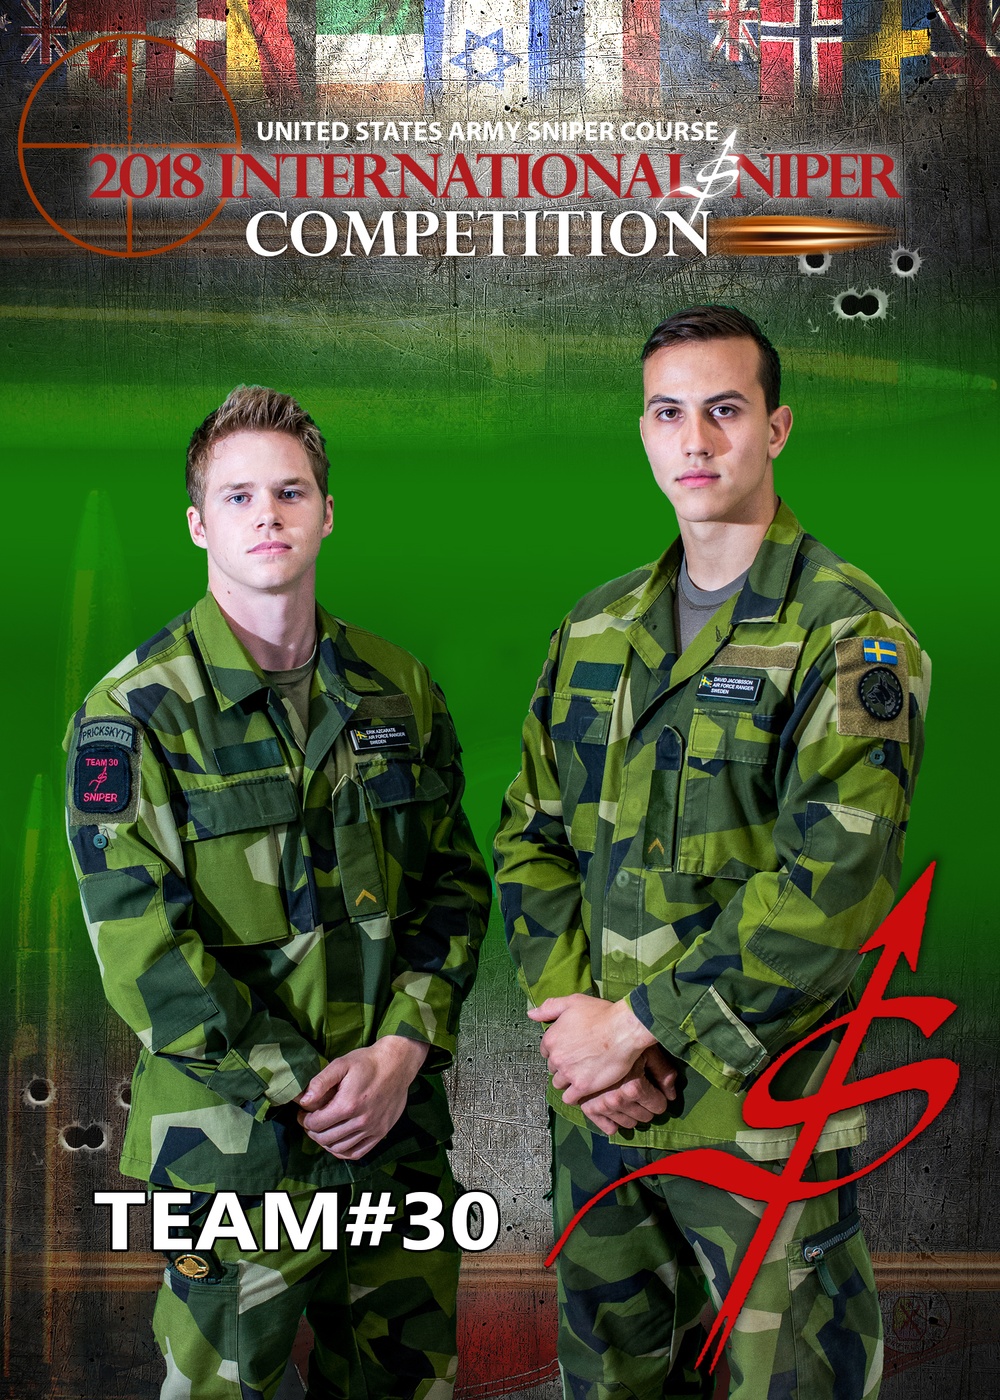 Third in 2018 International Sniper Competition